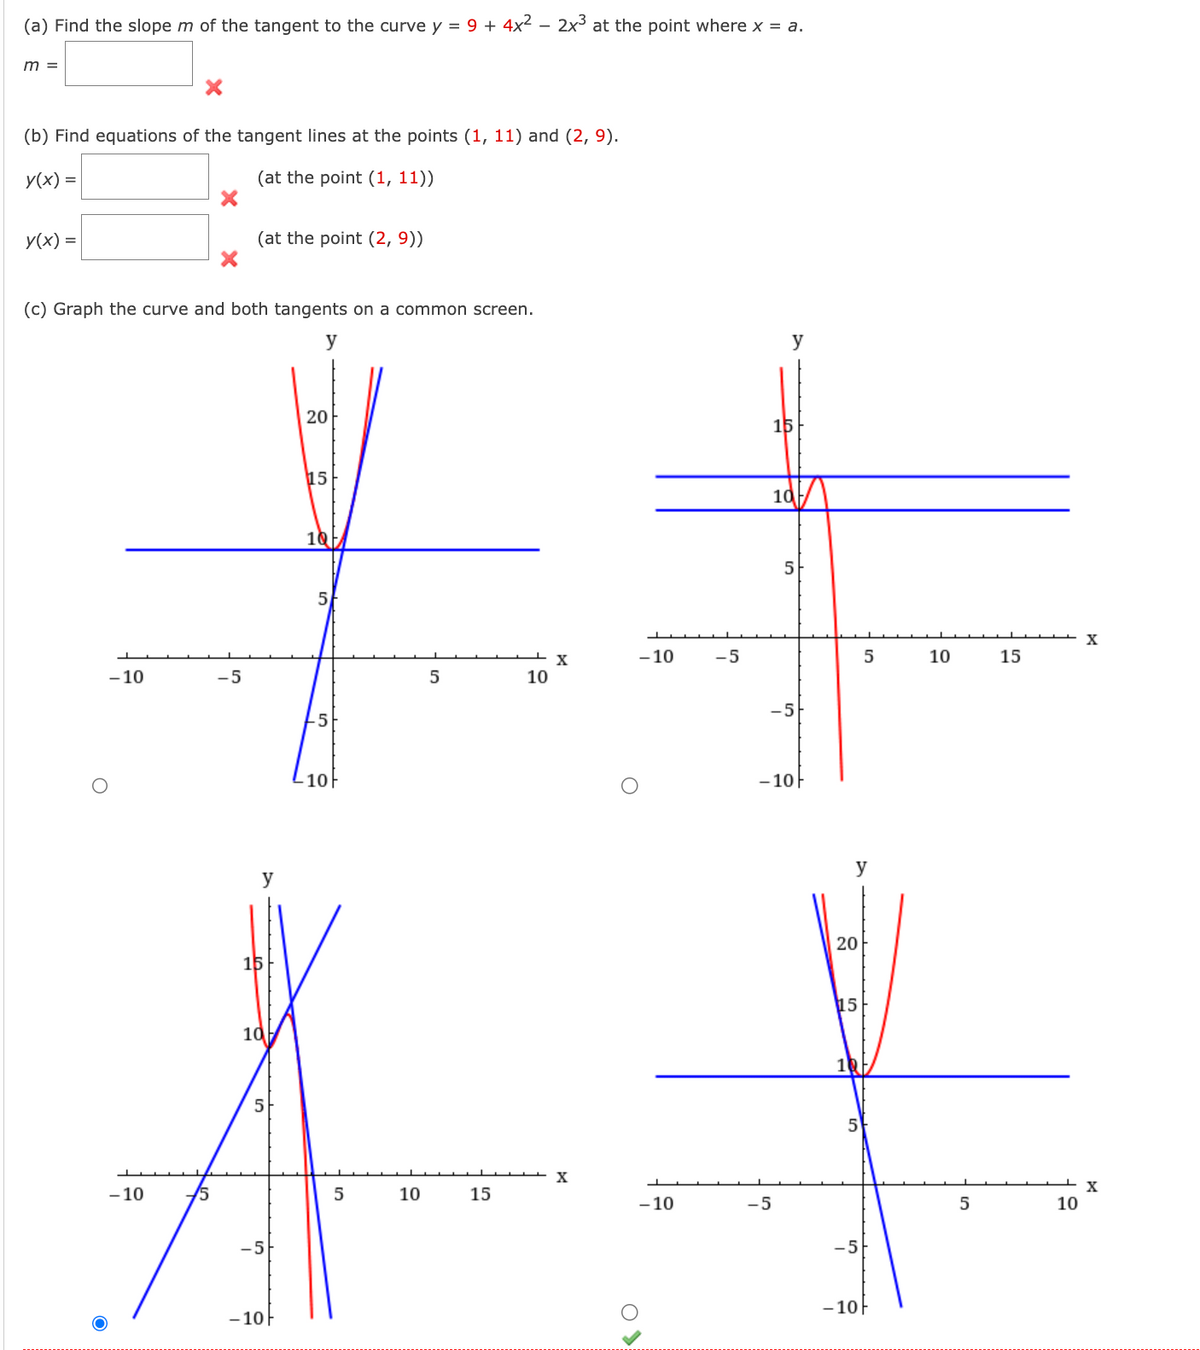 (a) Find the slope m of the tangent to the curve y = 9 + 4x² 2x³ at the point where x = a.
m =
(b) Find equations of the tangent lines at the points (1, 11) and (2, 9).
y(x) =
(at the point (1, 11))
y(x) =
(c) Graph the curve and both tangents on a common screen.
y
O
-10
- 10
(at the point (2, 9))
-5
y
15
10
5
-5
- 10-
20
15
1Q/
5
10
5
10
5
15
10
X
X
-10 -5
O
-10
15
10/
-5
5
-5
-10F
20
15
-5
- 10
5
10
5
15
10
X
X